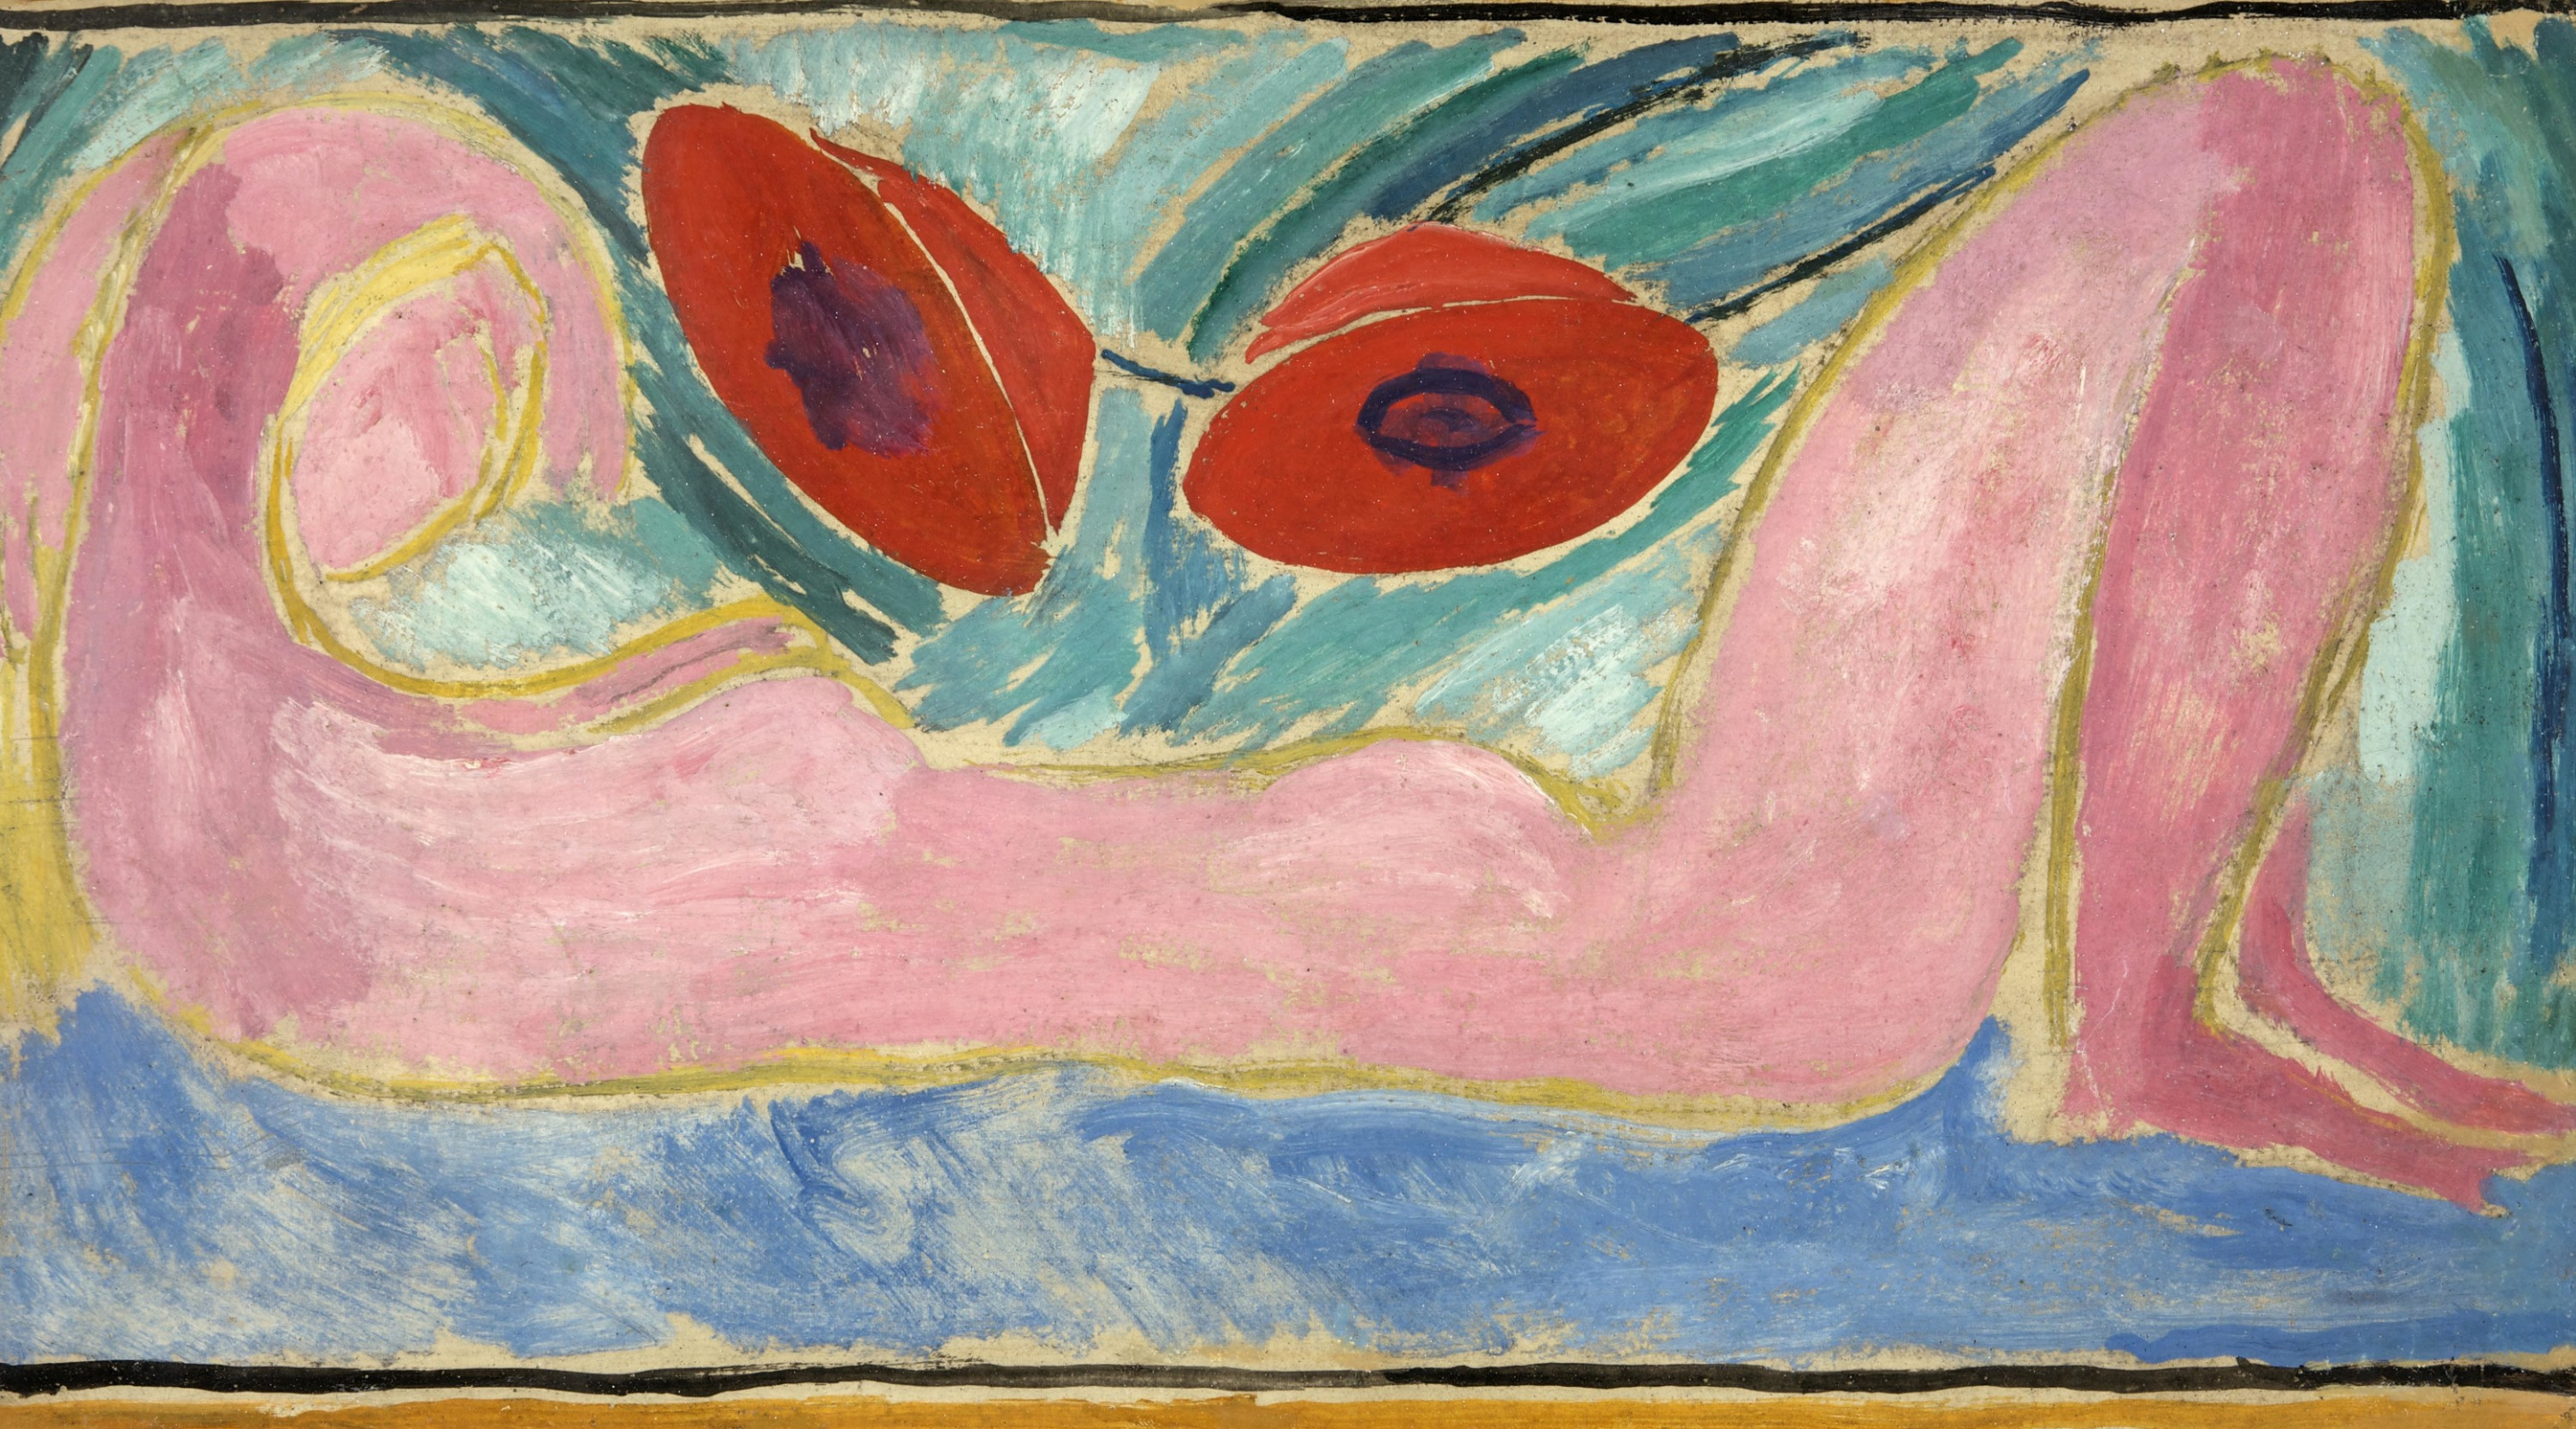 Nude with raised arm by Vanessa Bell on artnet